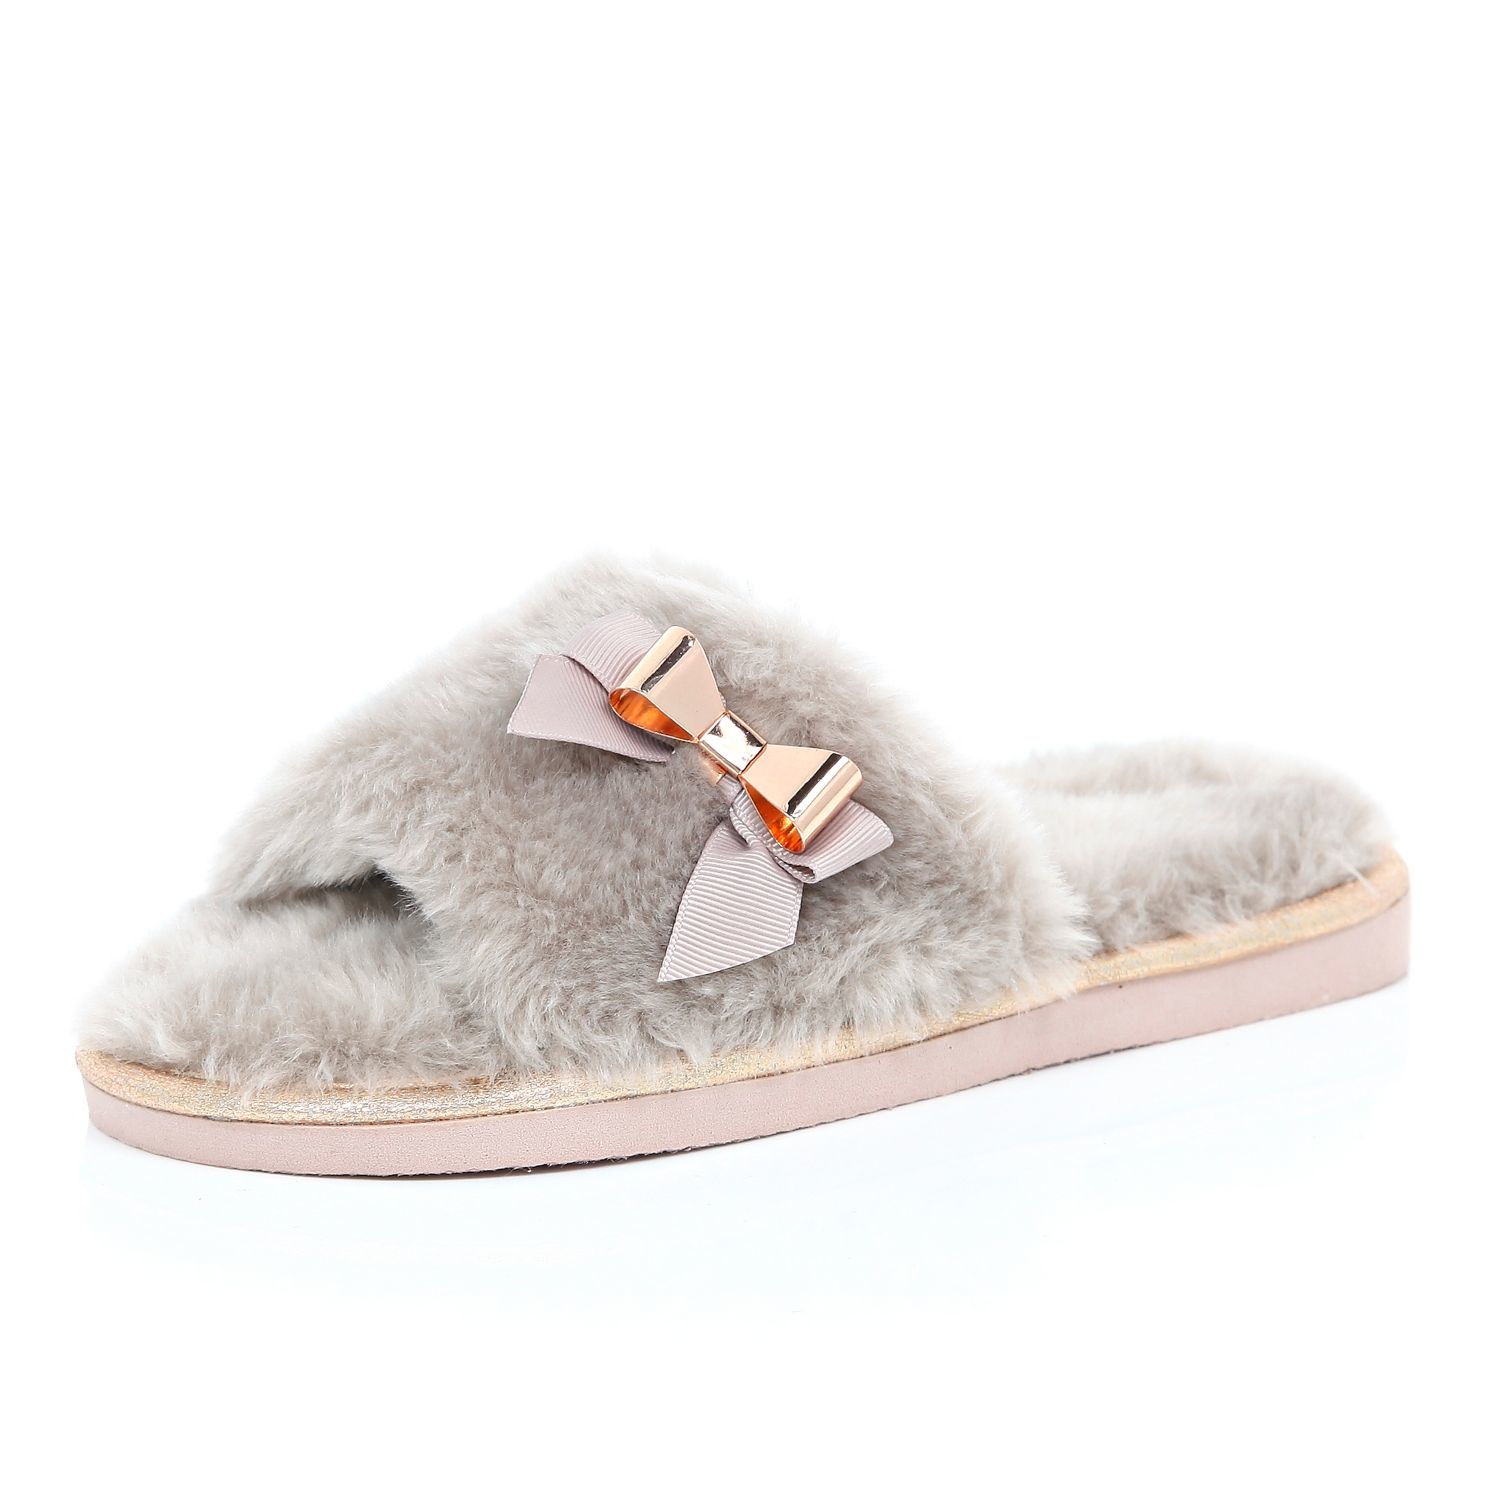 river island slippers size guide